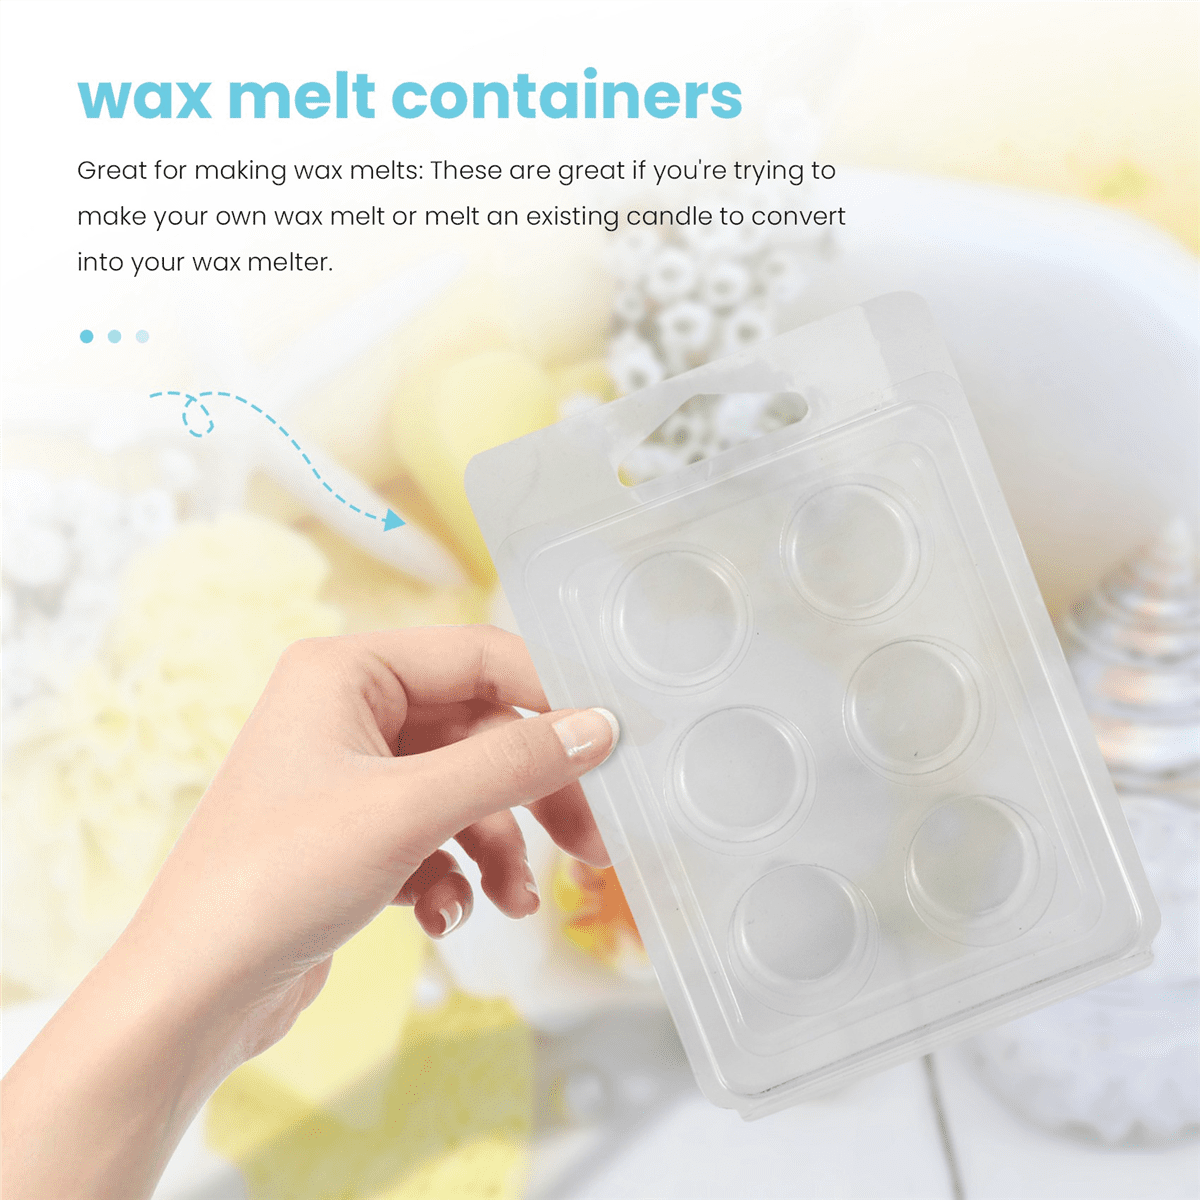 North Mountain Supply Wax Melt Large 5 Ounce 6-Cavity Clamshells - 60 Pack